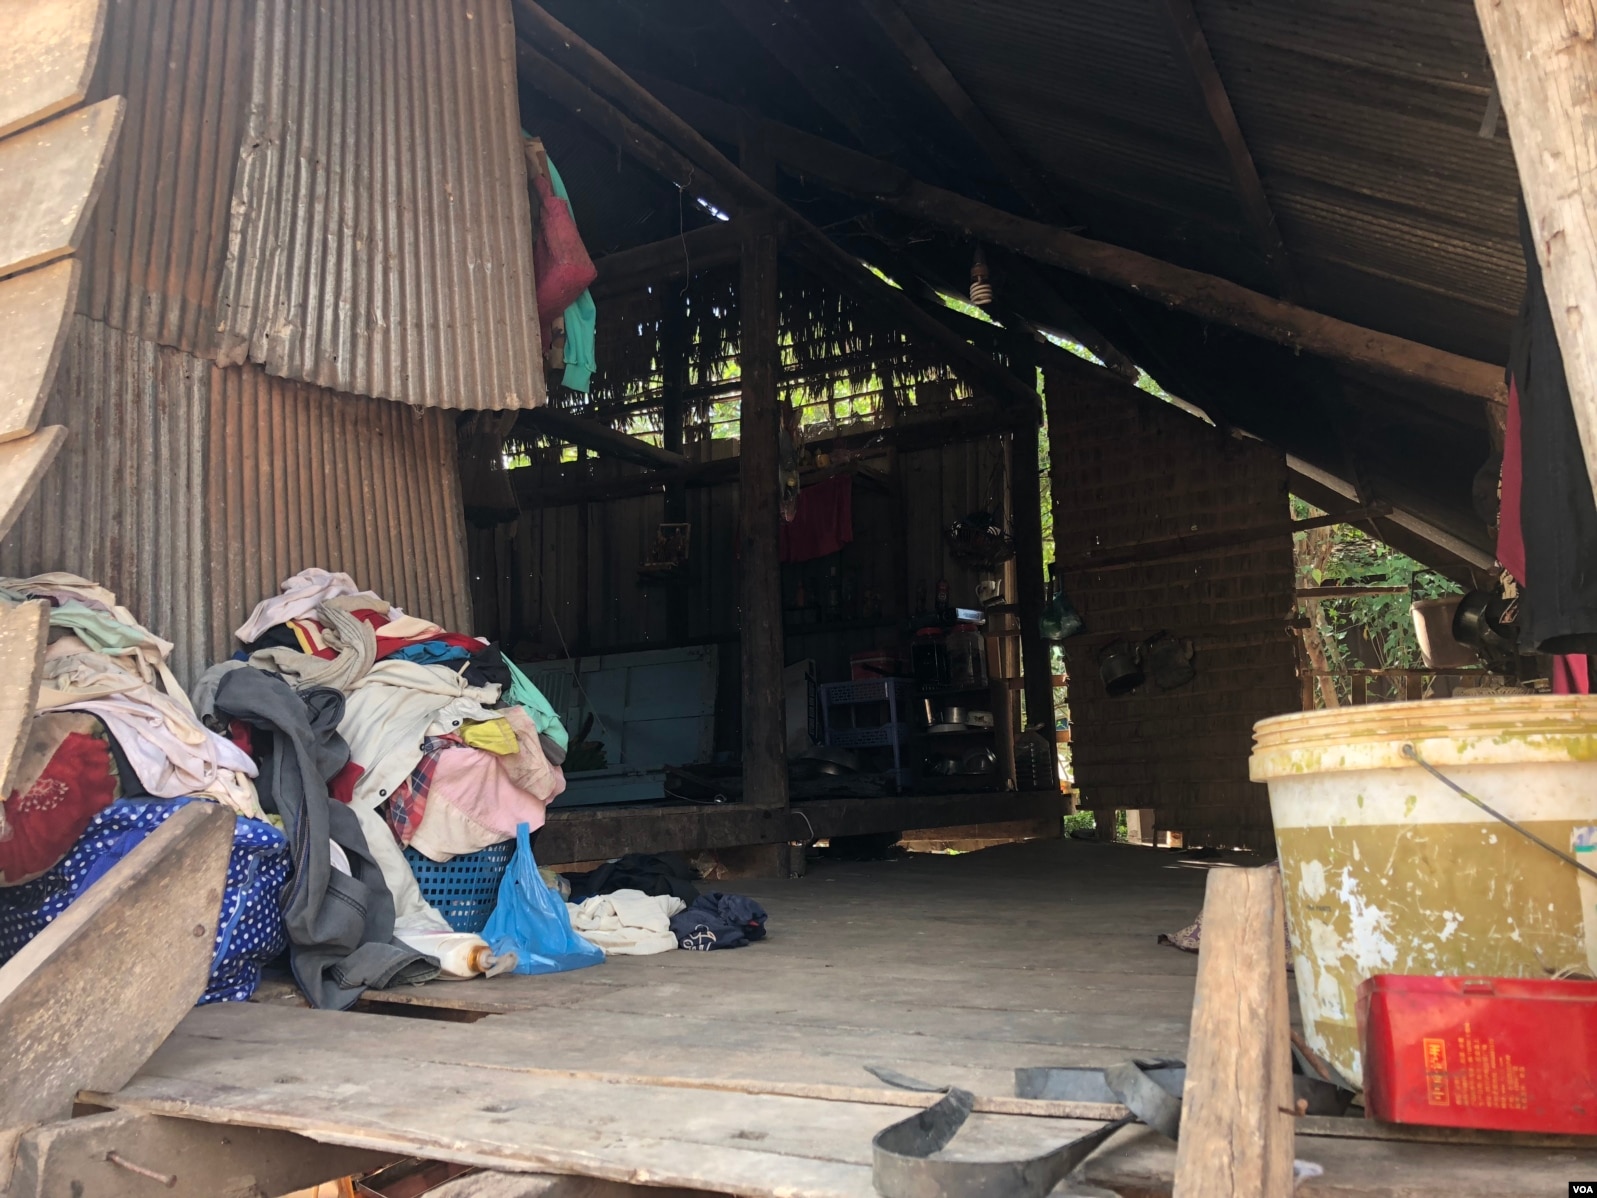 Pha Chorvoin’s house is located in Siem Reap City’s Chreav commune. She has not been granted an Equity Card. March 15, 2019. (Sun Narin/VOA Khmer)